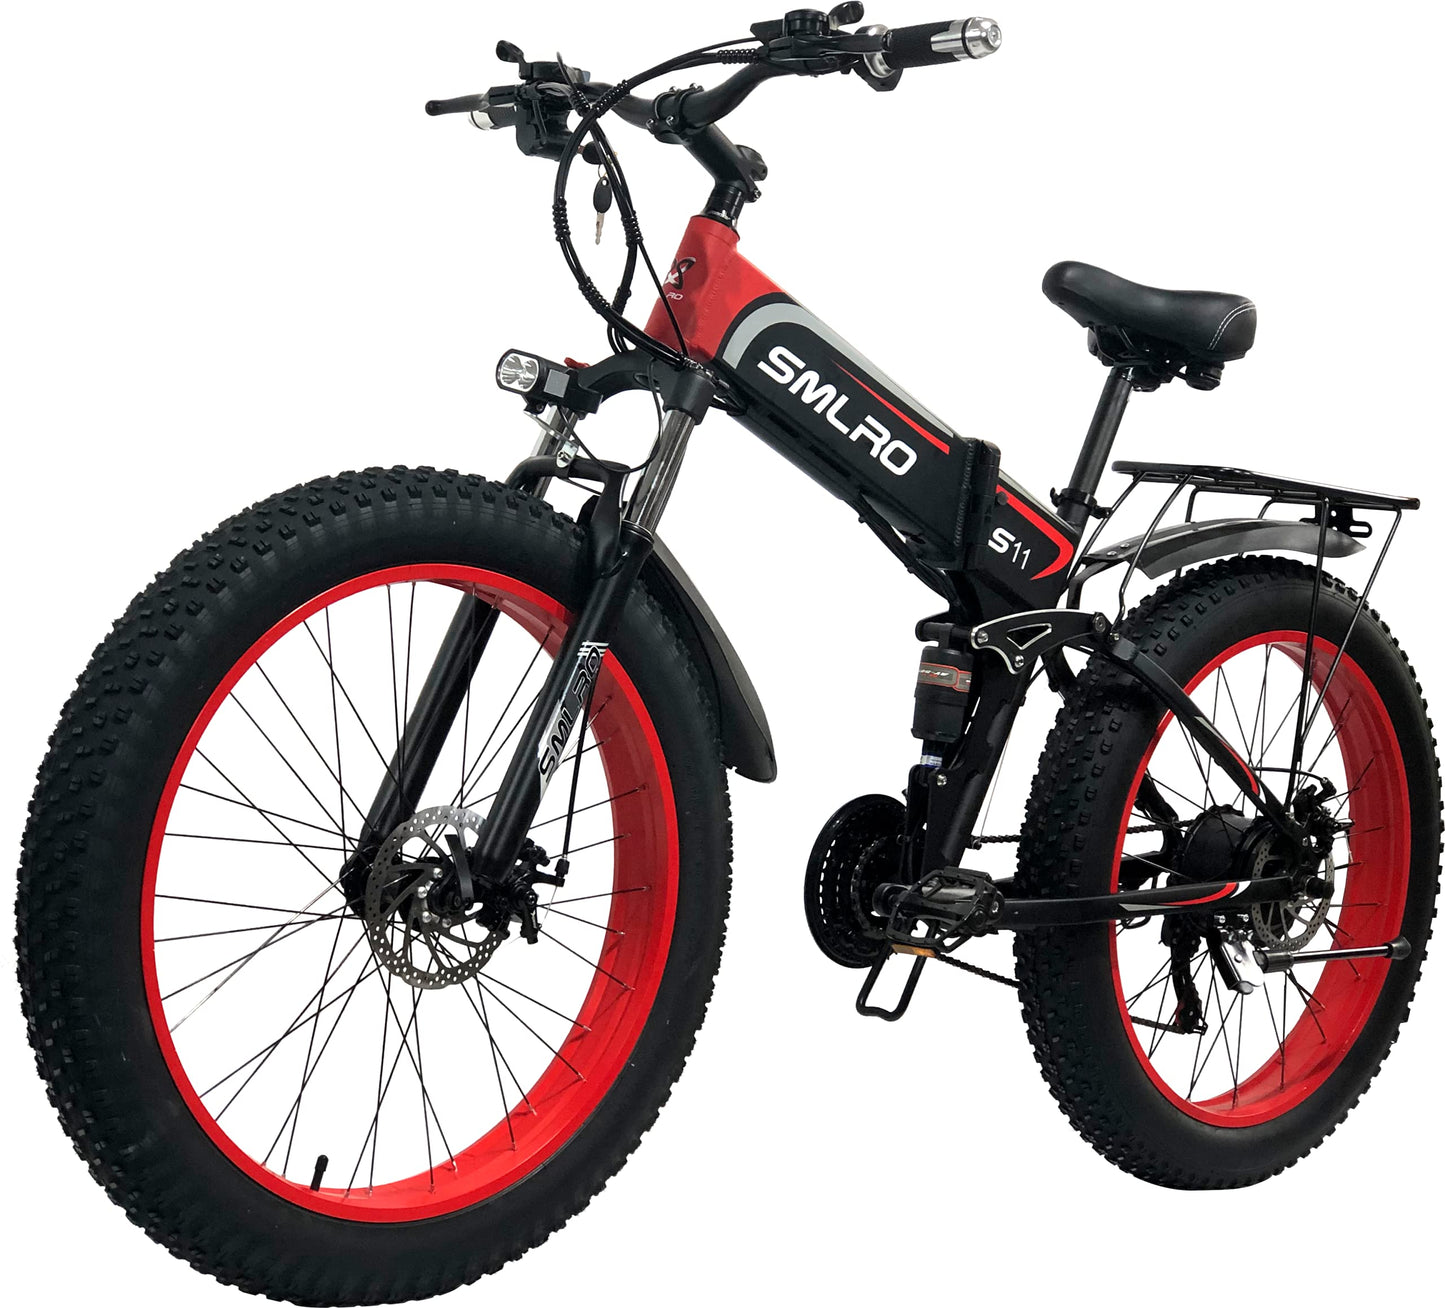 YinZhiBoo Folding Ebike 26“ 4.0 Fat Tire Foldable Electric Bike 500W Motor Removable 48V/10AH BatteryThrottle & Pedal Assist Shimano 21-Speed UL and GCC Certified | Decor Gifts and More